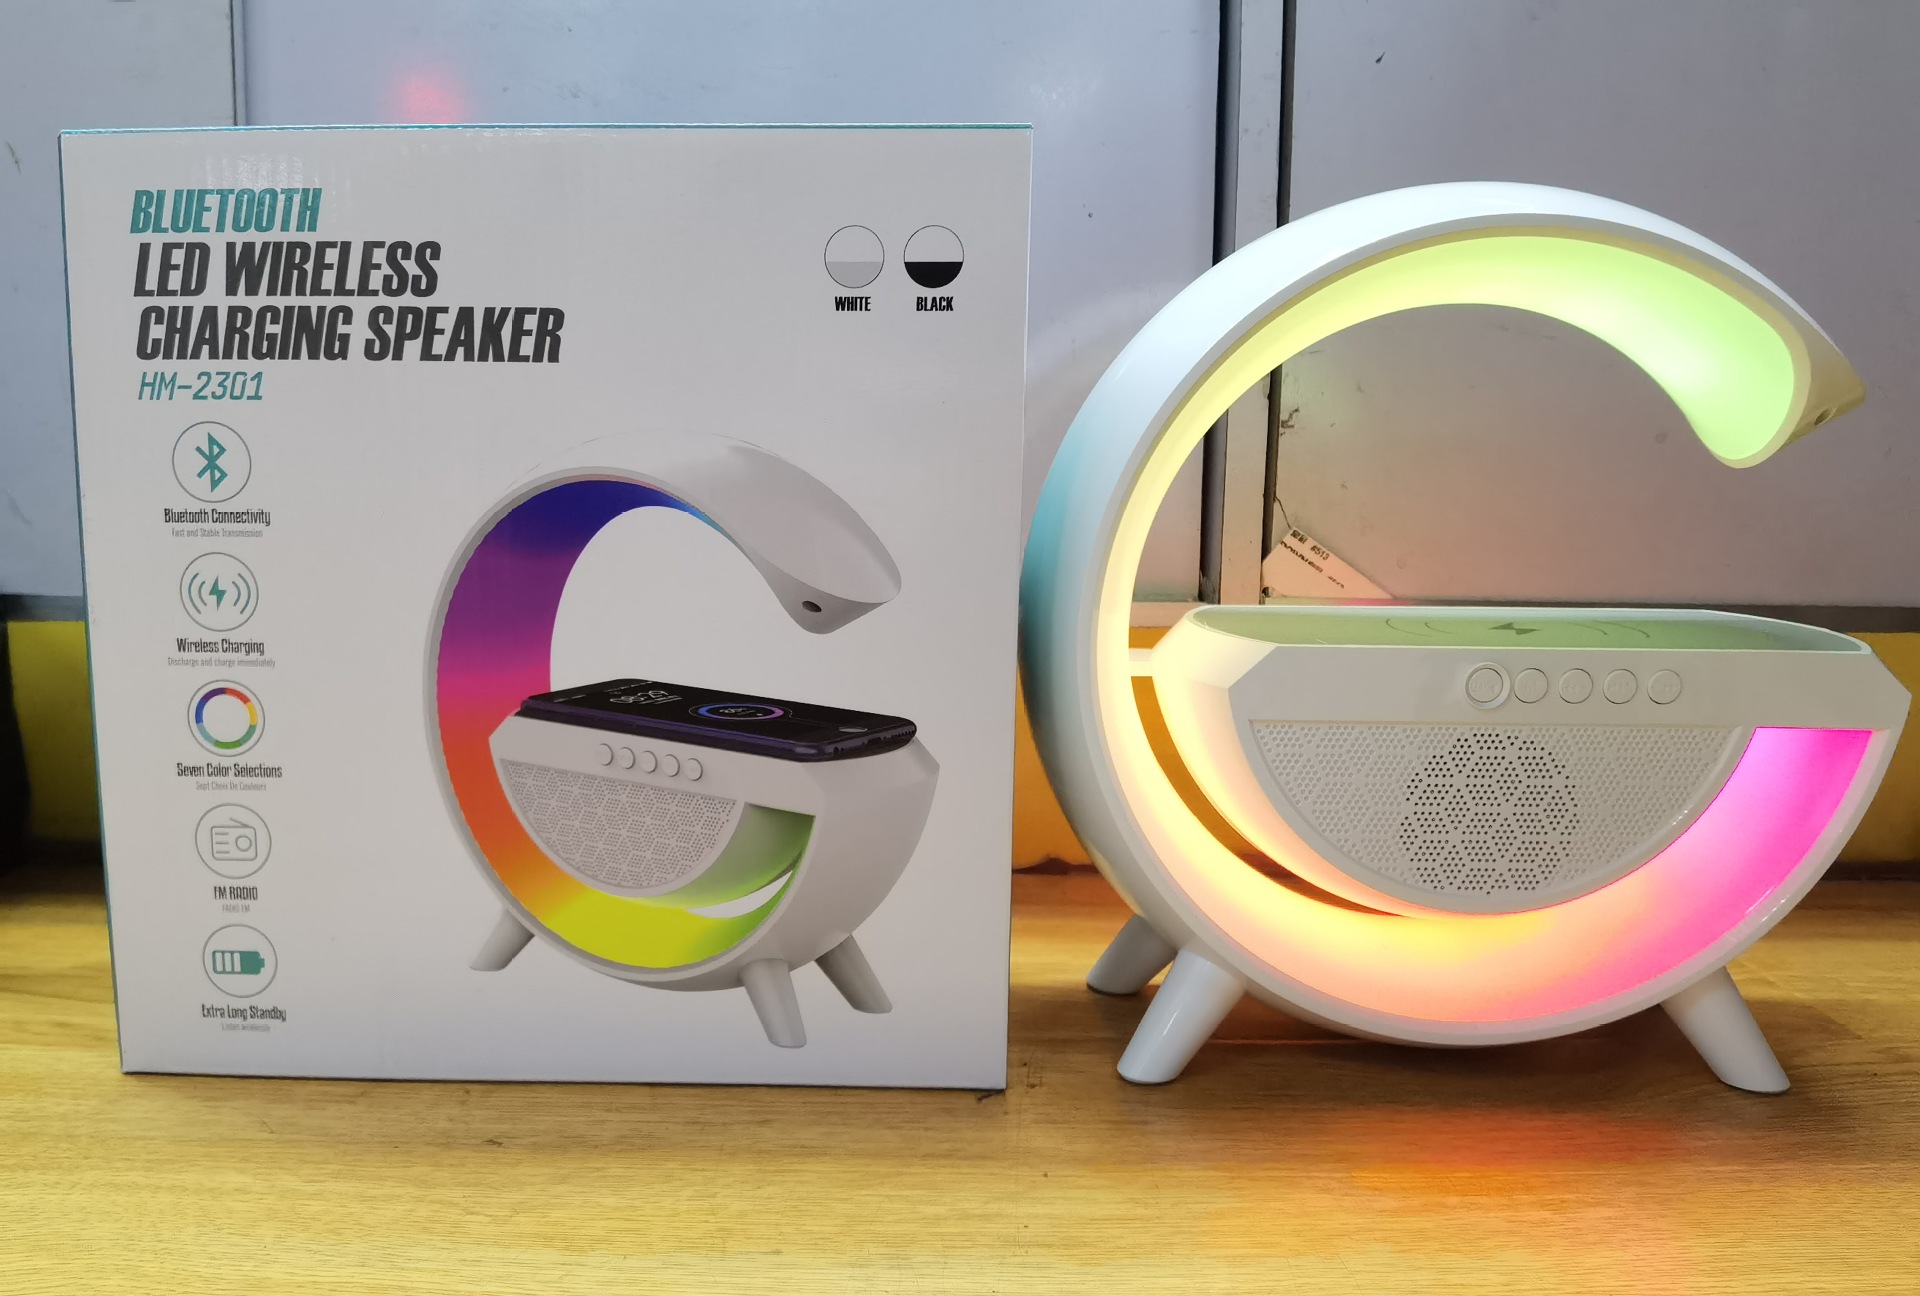 New Bt2301 Large G Smart Ambience Light Bluetooth Speaker Wireless Charger Colorful Bedside Ambience Light Wake-up Light Usb